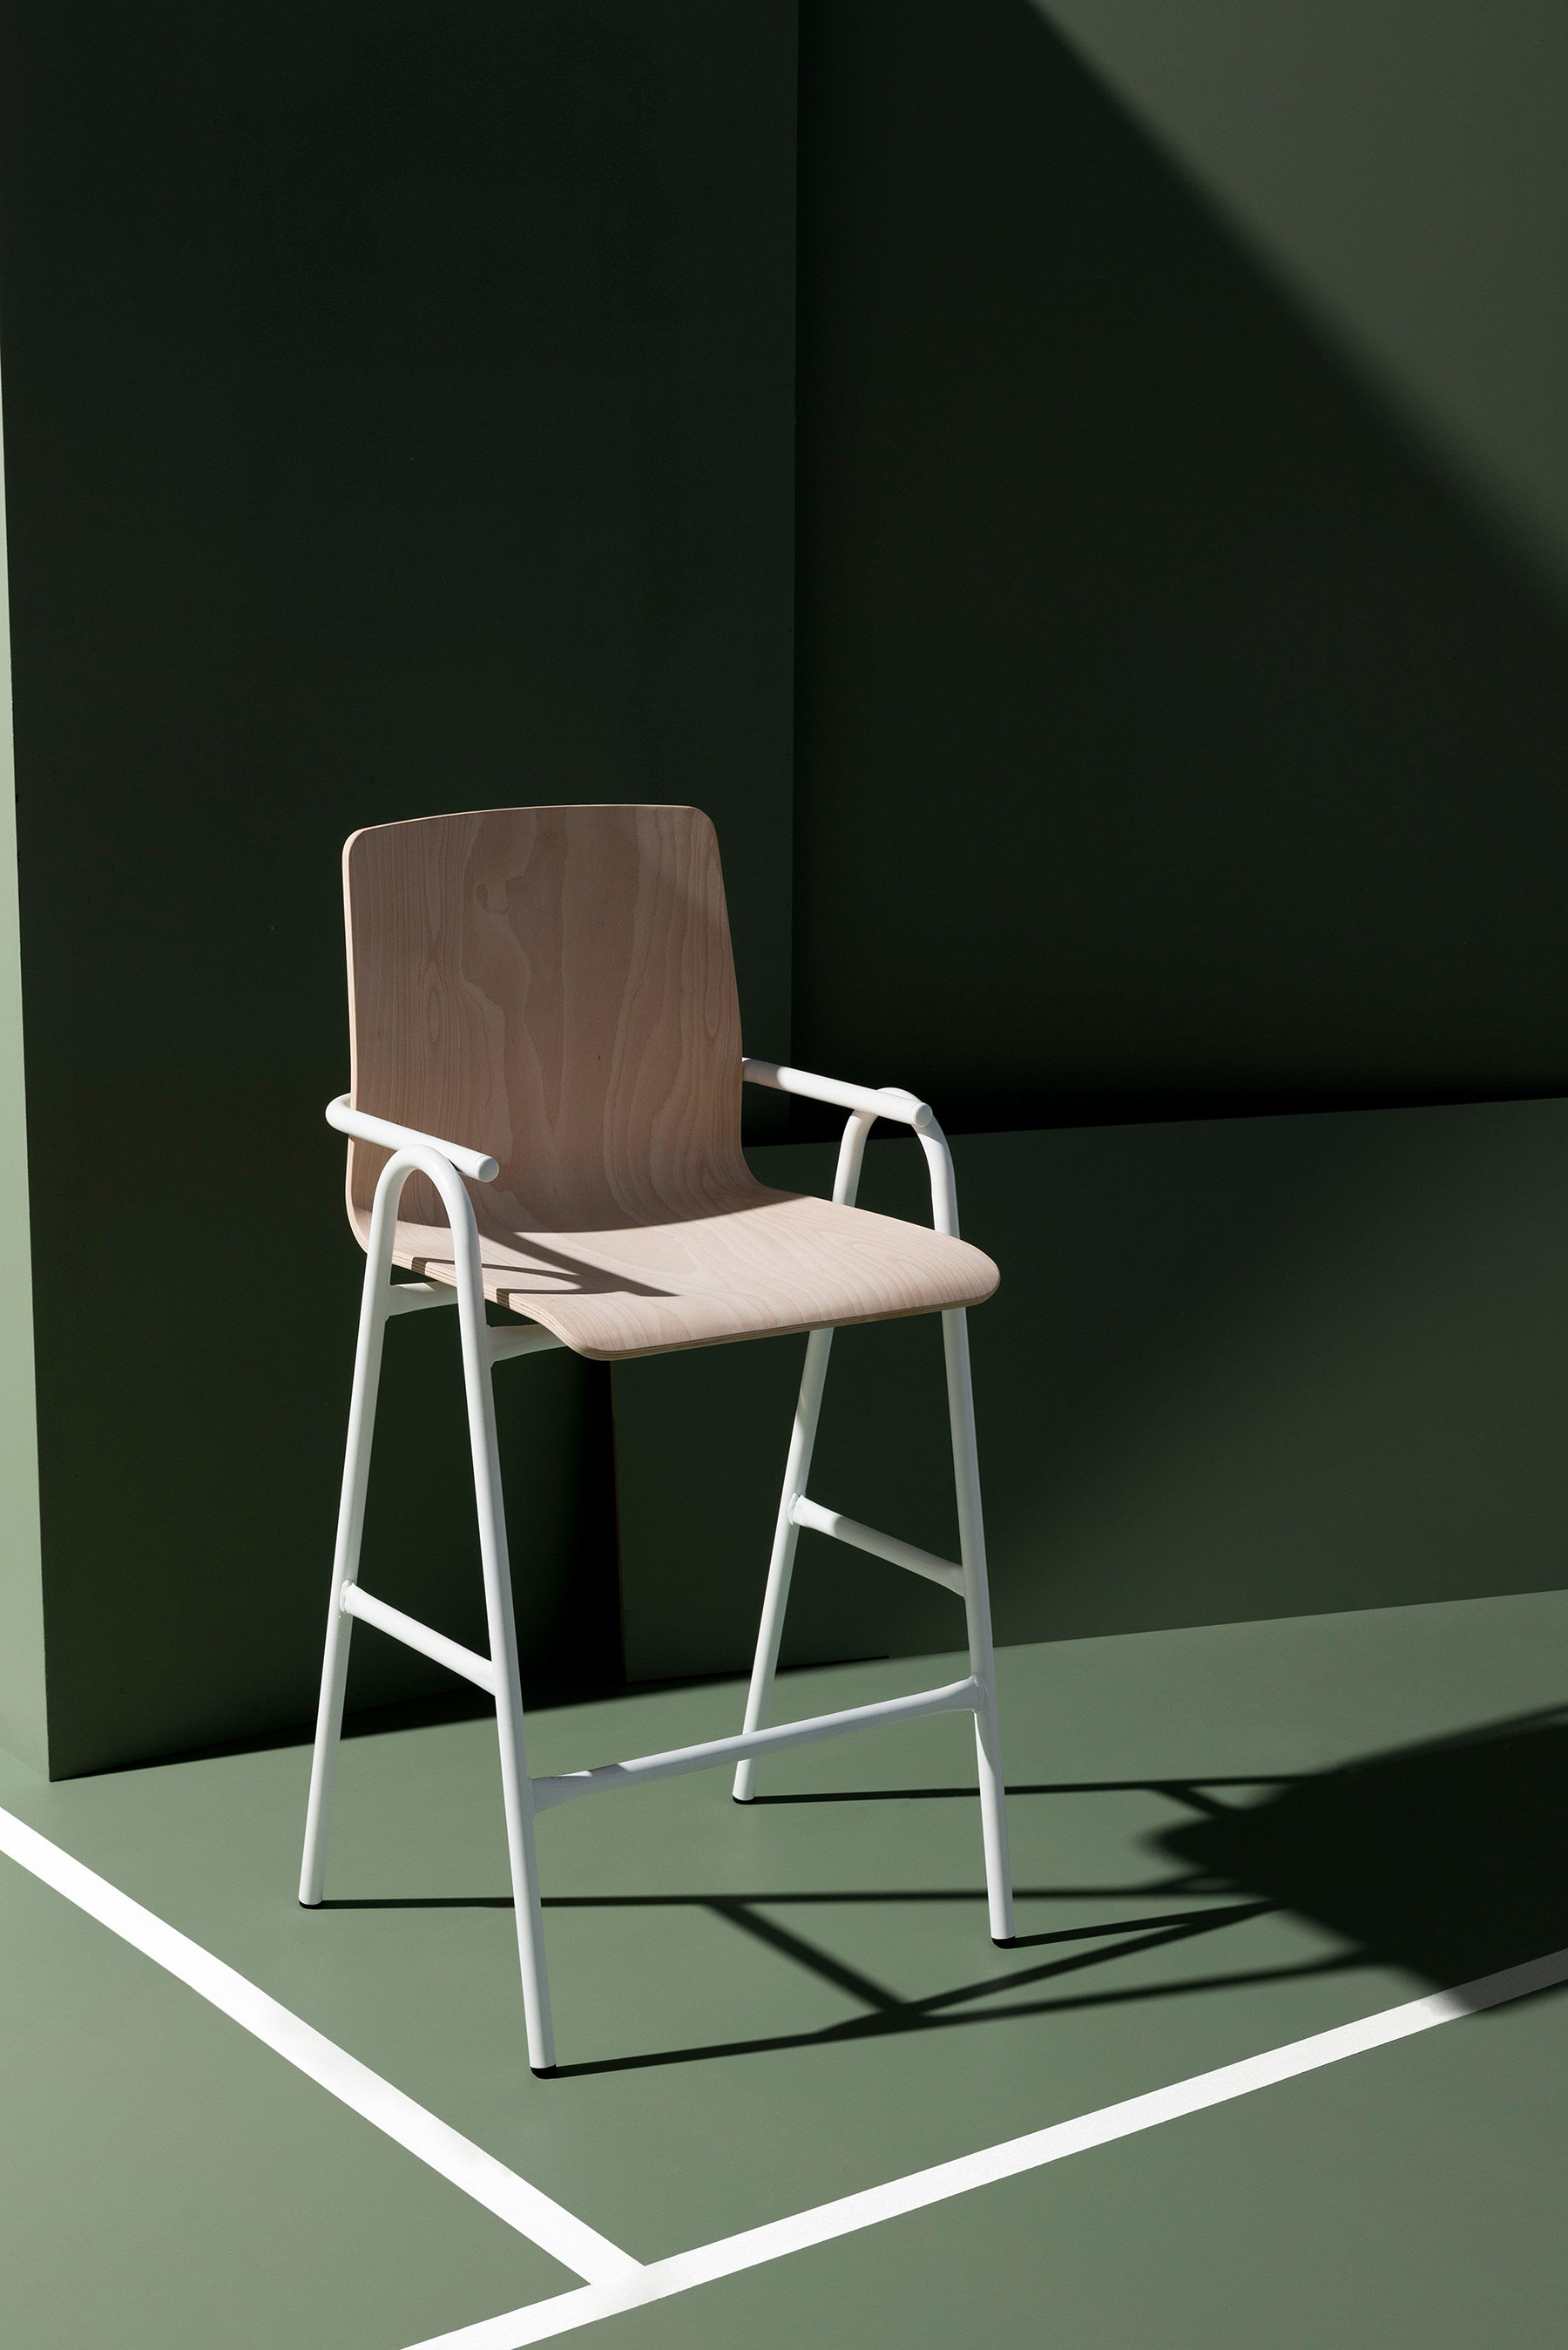 Modern Chair Design Meets Minimalism - The Hurdle Collection-7